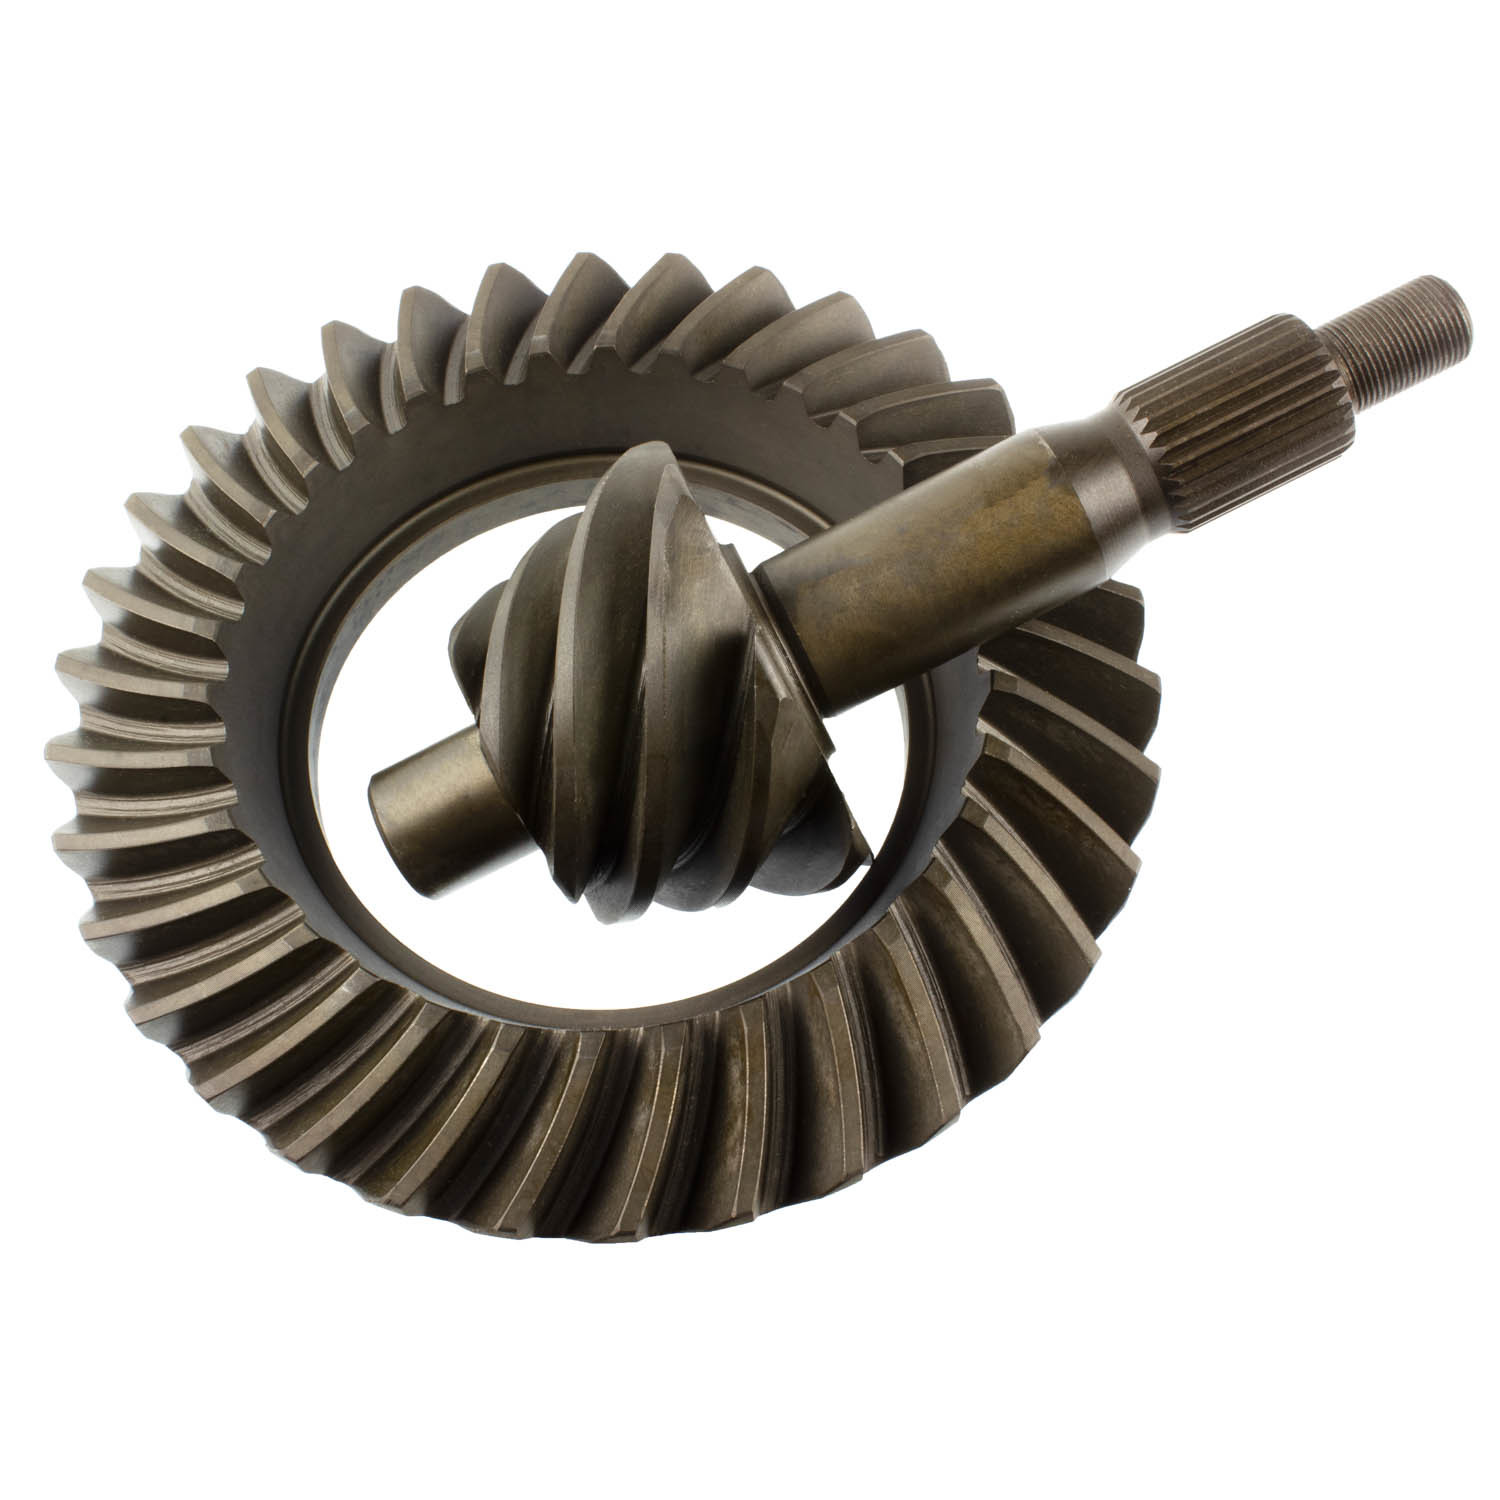 Richmond Gear F9486 - Ring and Pinion, Excel, 4.86 Ratio, 28 Spline Pinion, Ford 9 in, Kit